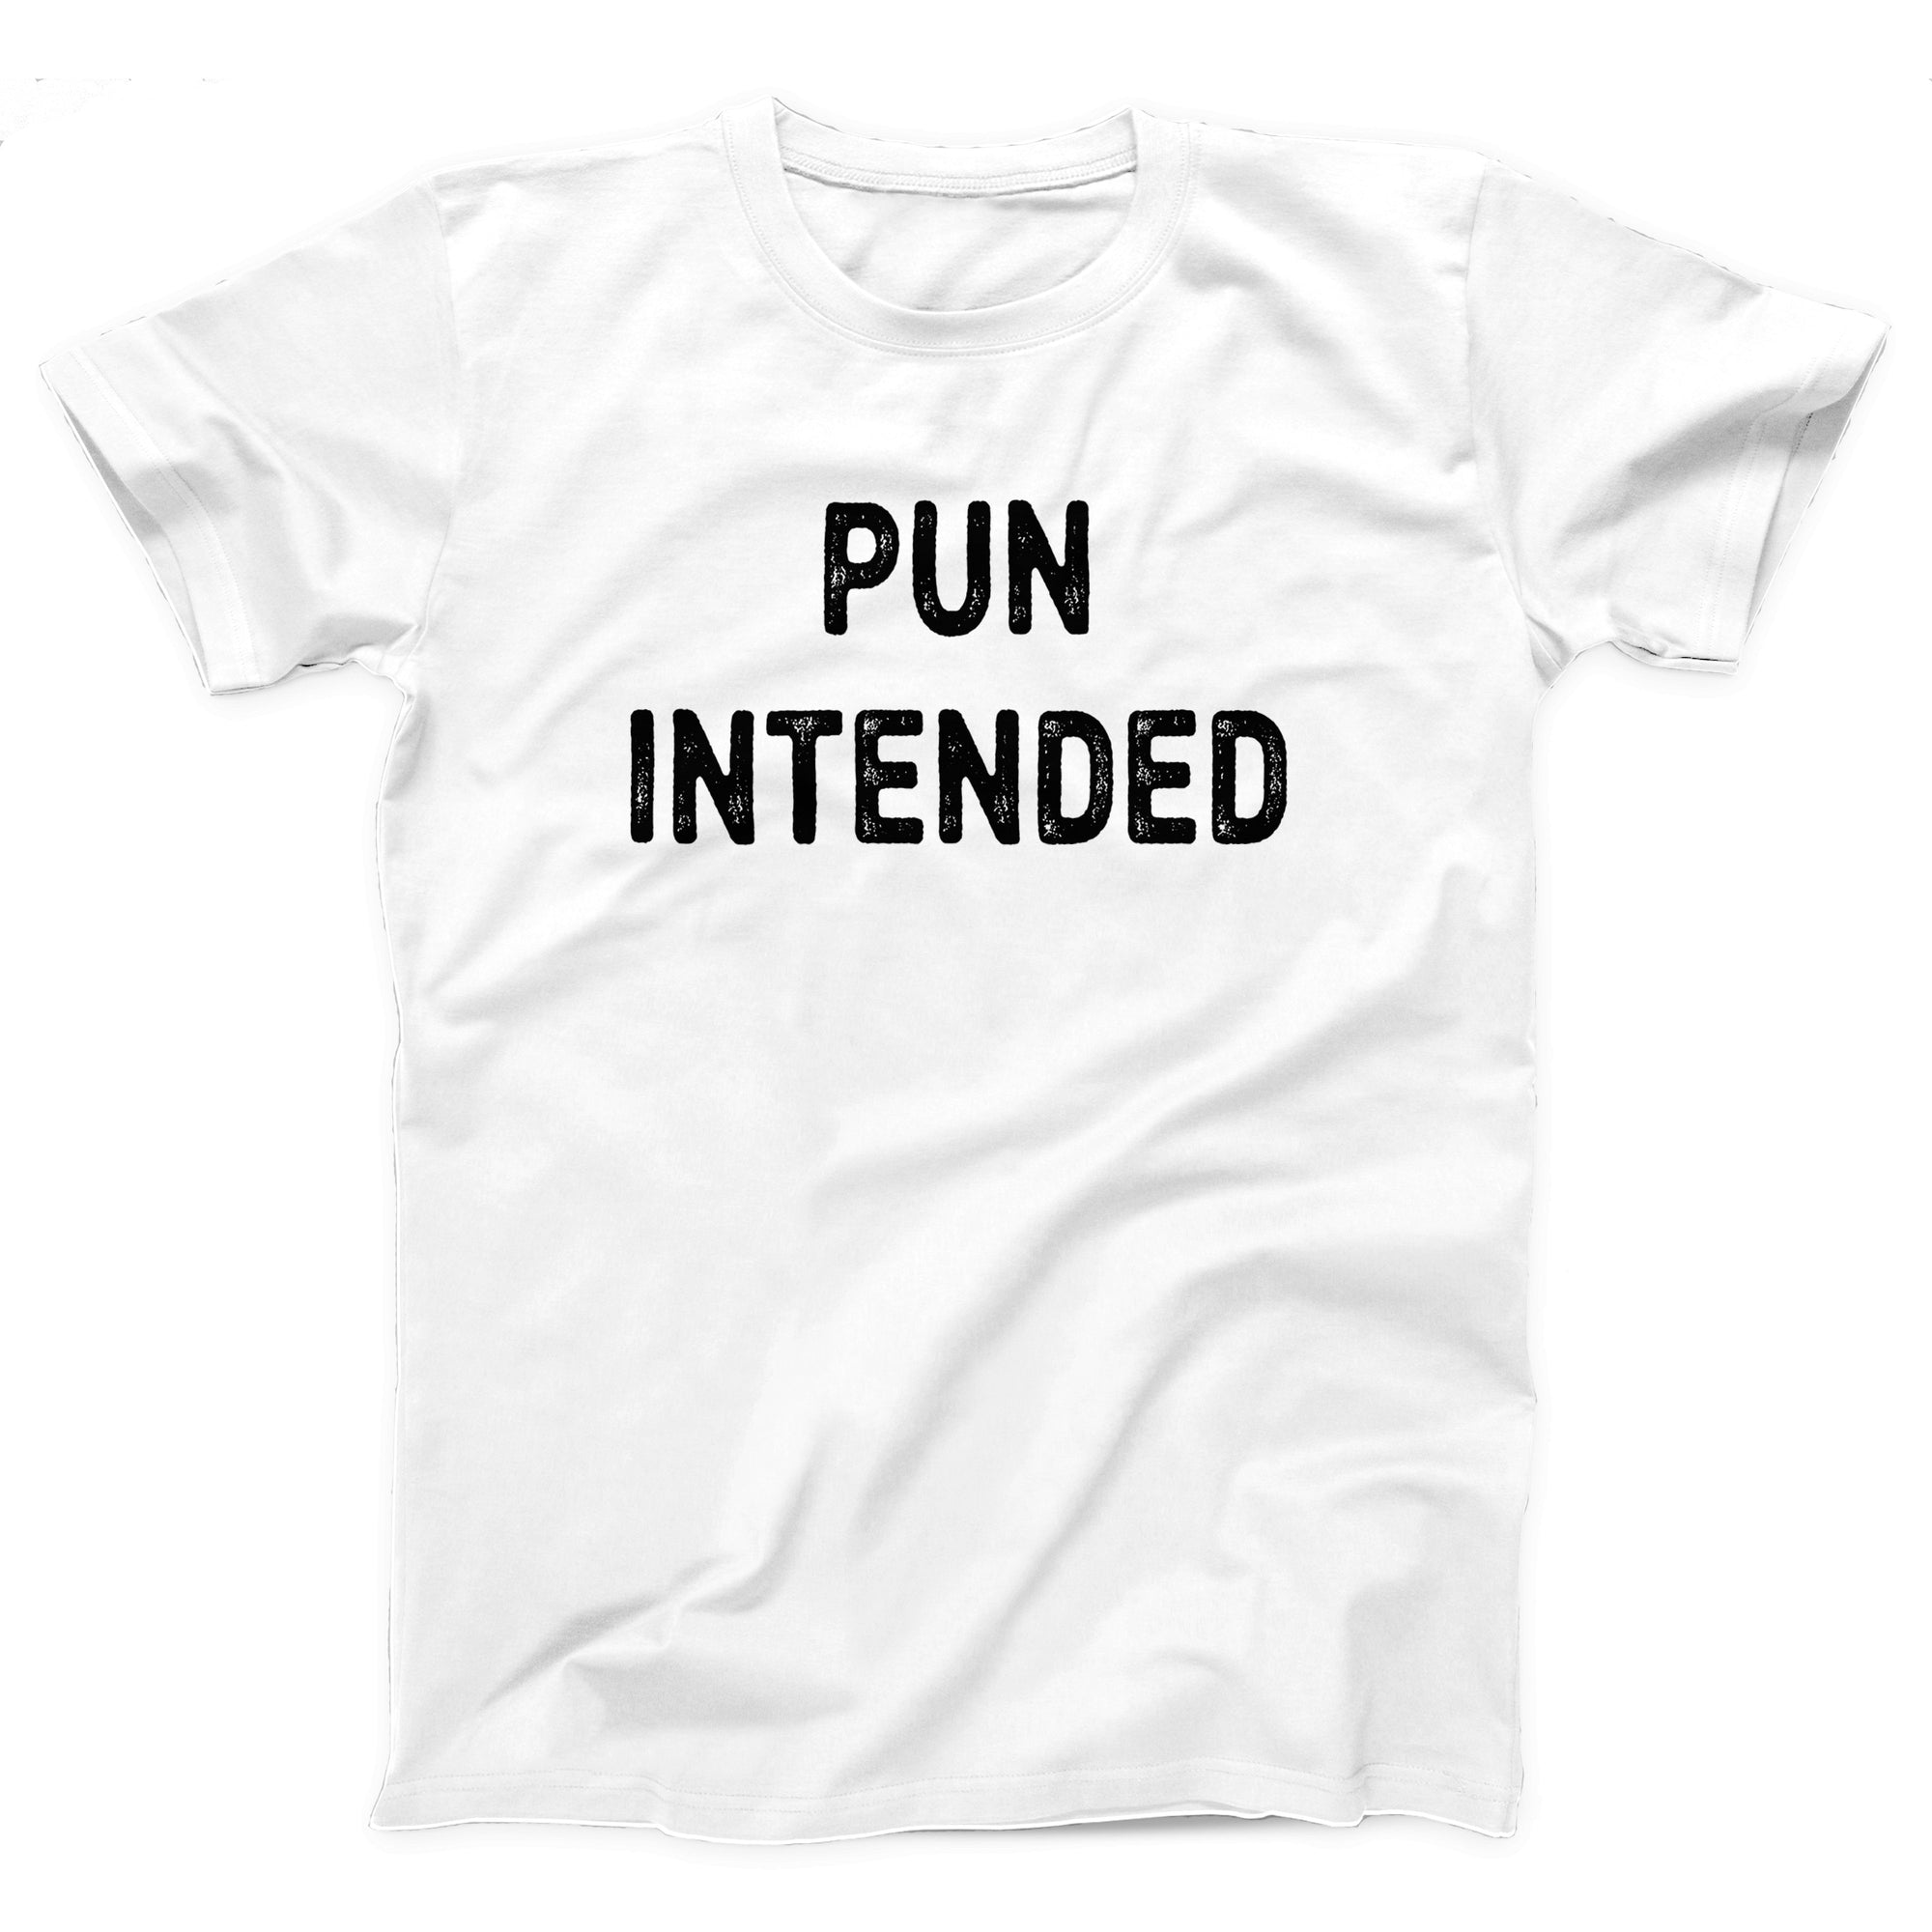 Pun Intended Adult Unisex T-Shirt - Twisted Gorilla